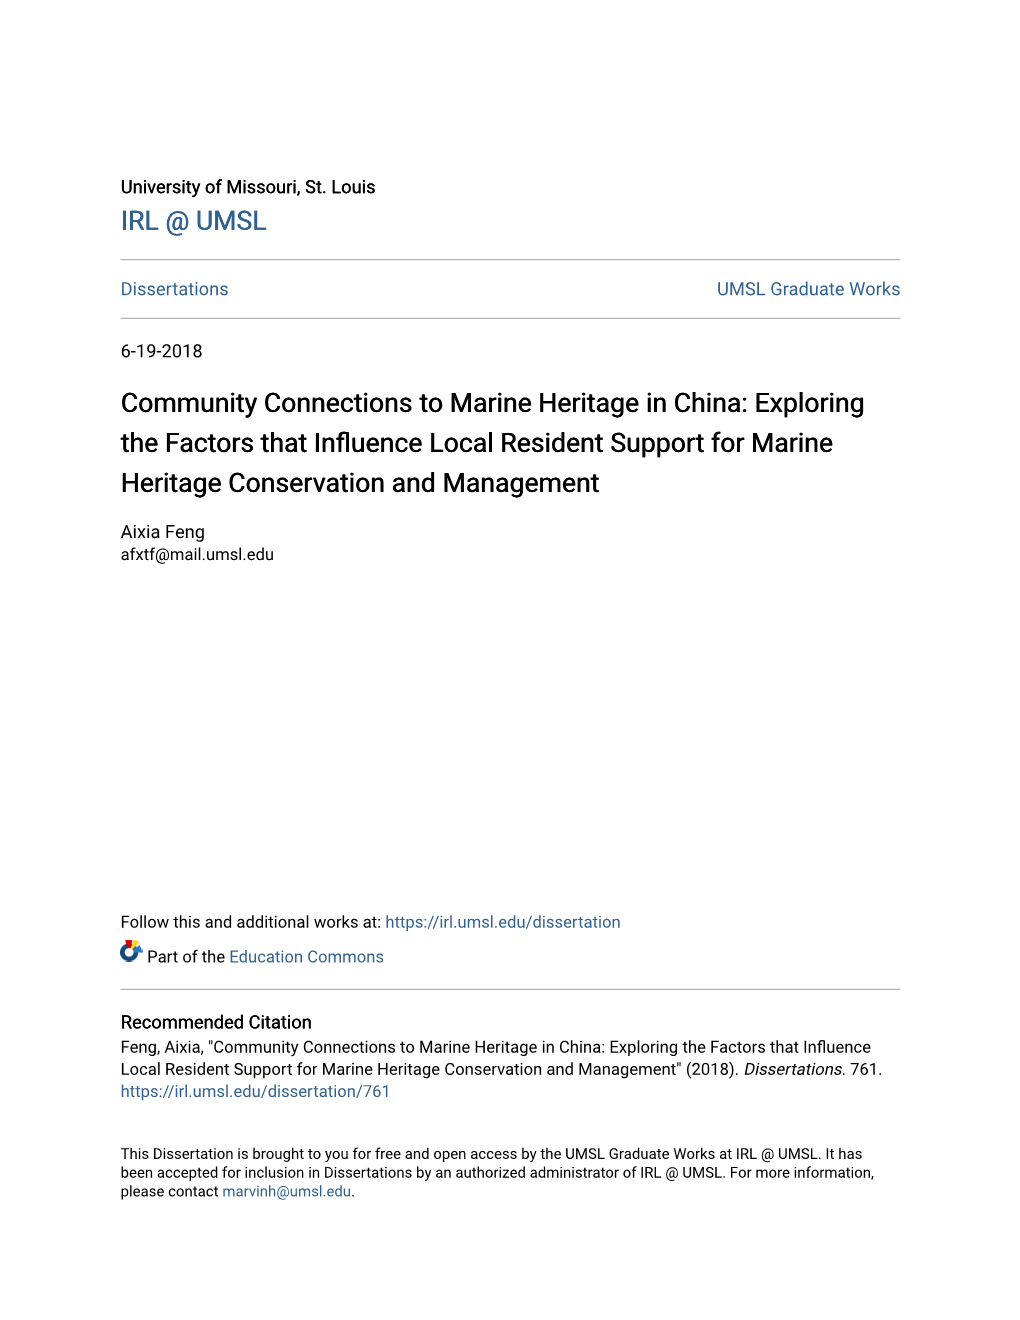 Community Connections to Marine Heritage in China: Exploring the Factors That Influence Local Resident Support for Marine Heritage Conservation and Management